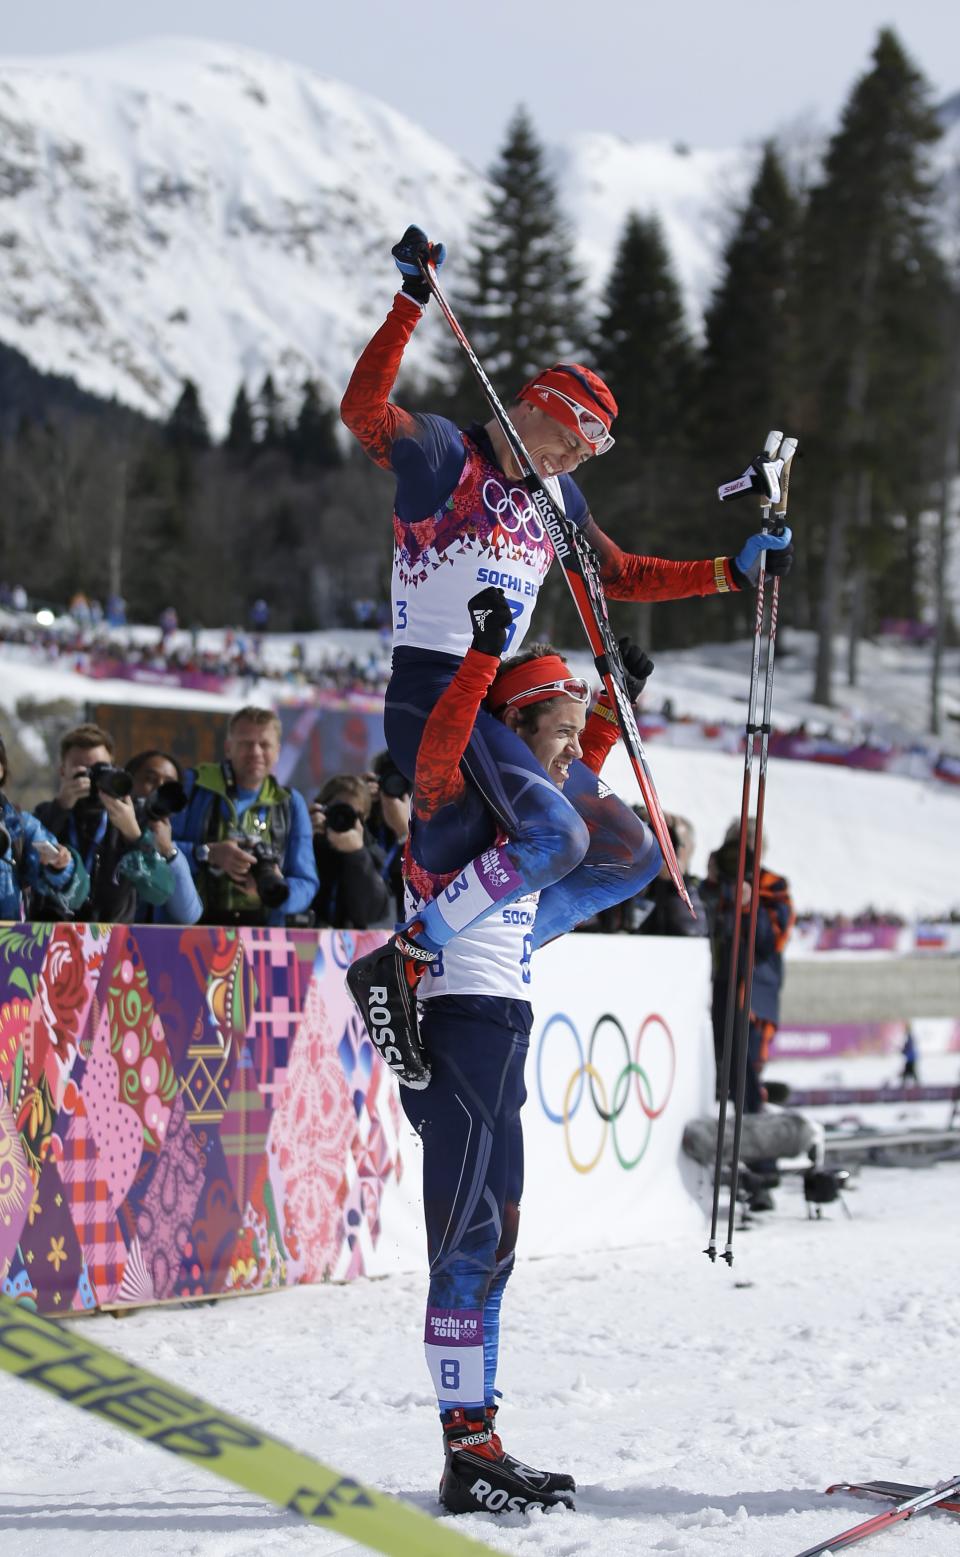 Russia's Alexander Legkov, the gold medal winner, is carried on the shoulders of bronze medalist Russia's Ilia Chernousov after the men's 50K cross-country race at the 2014 Winter Olympics, Sunday, Feb. 23, 2014, in Krasnaya Polyana, Russia. (AP Photo/Gregorio Borgia)